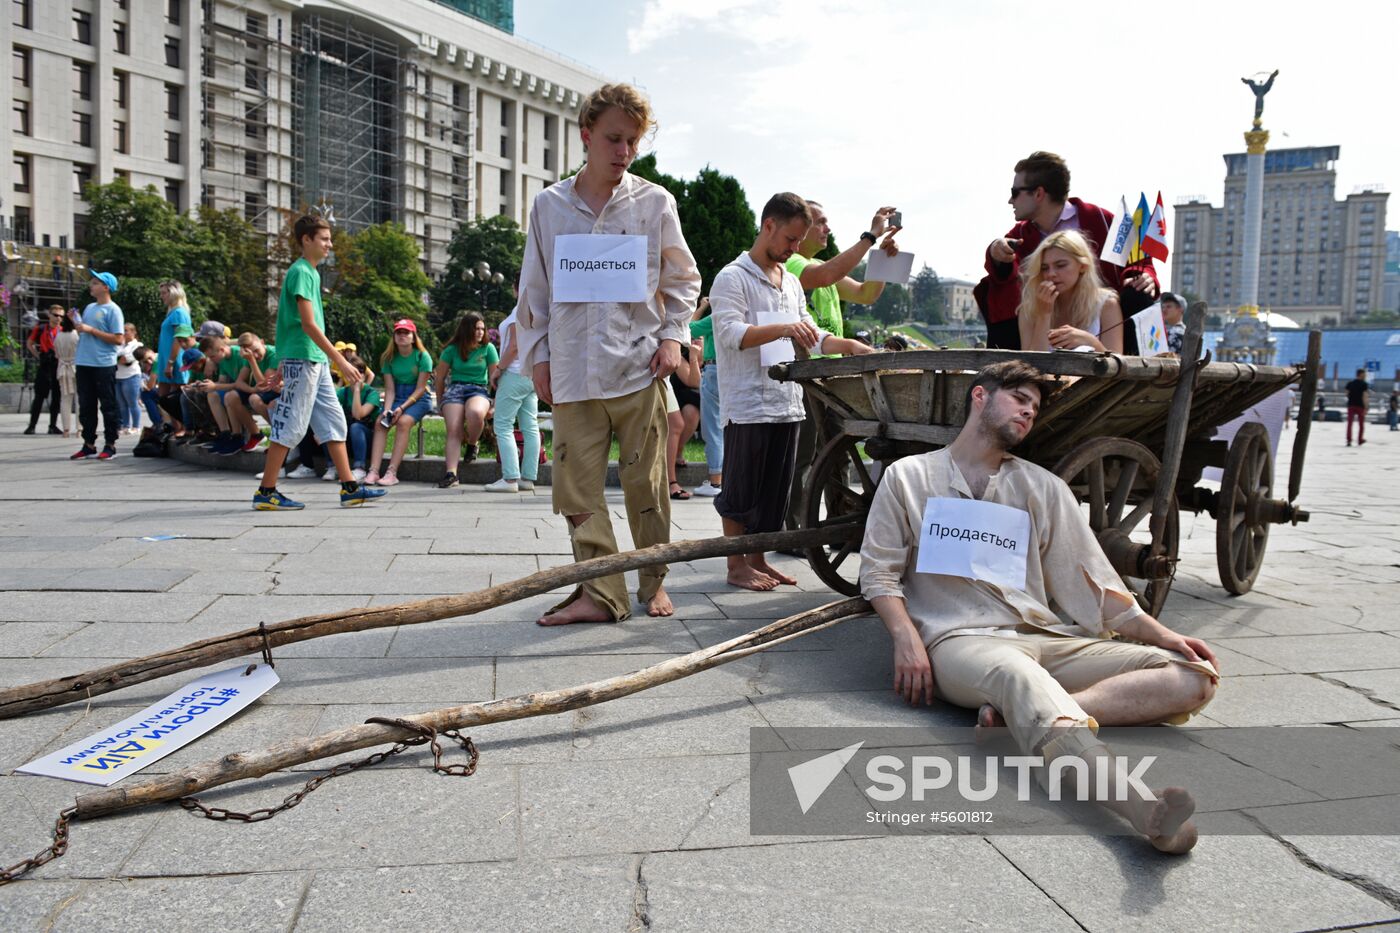 Event in Kiev against human trafficking